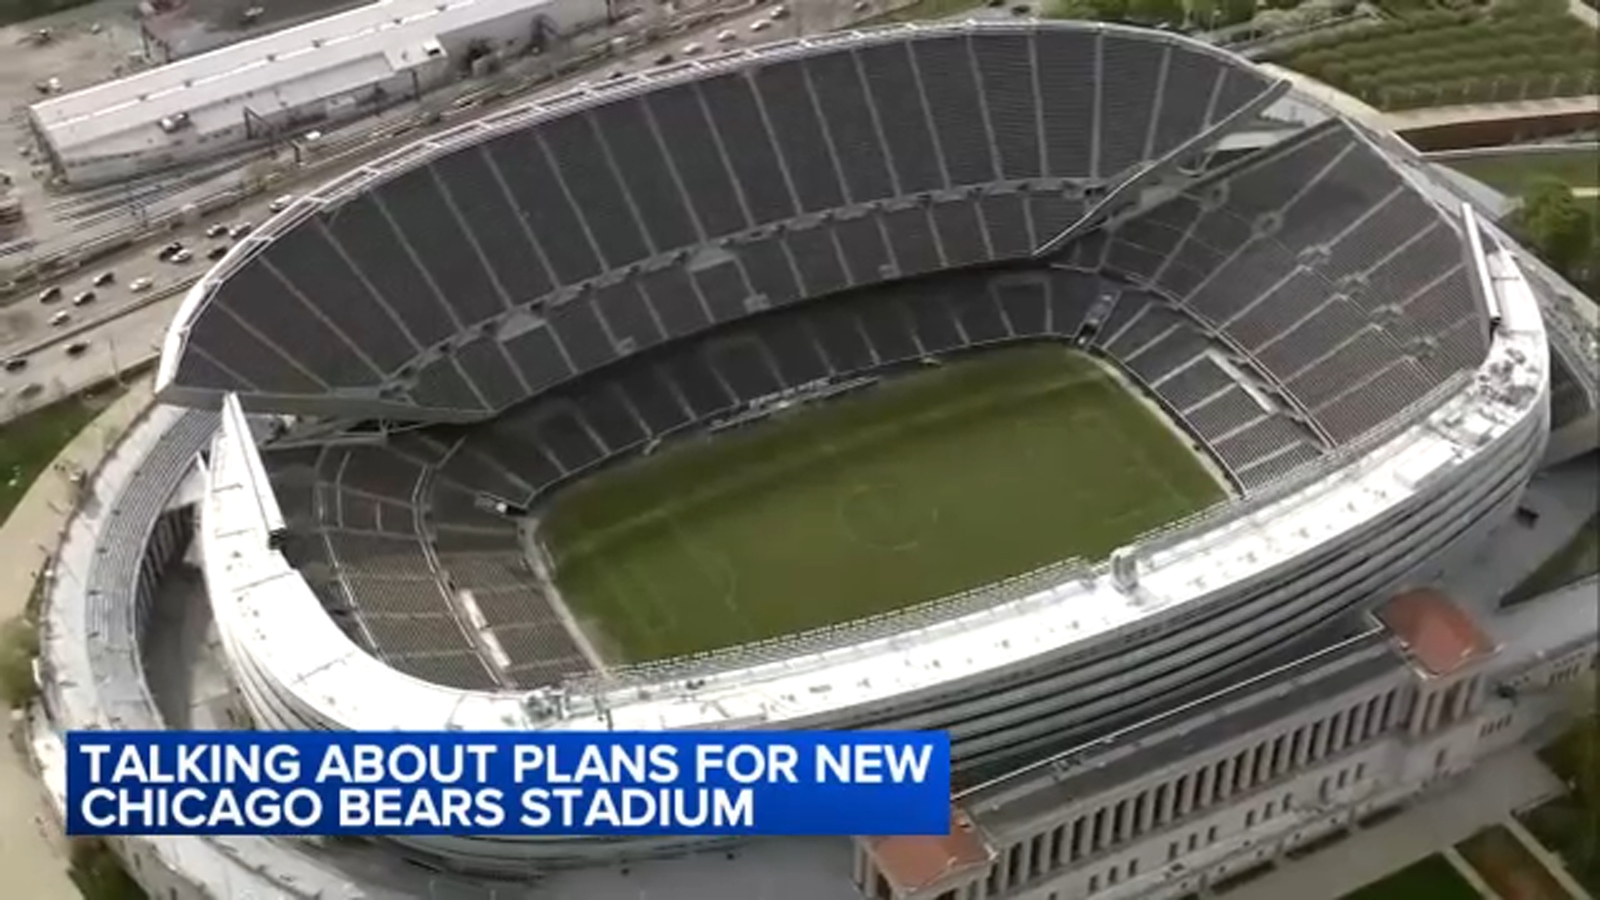 Chicago Bears want taxpayers to help pay for new domed lakefront stadium, but experts say city unlikely to get revenue from it [Video]